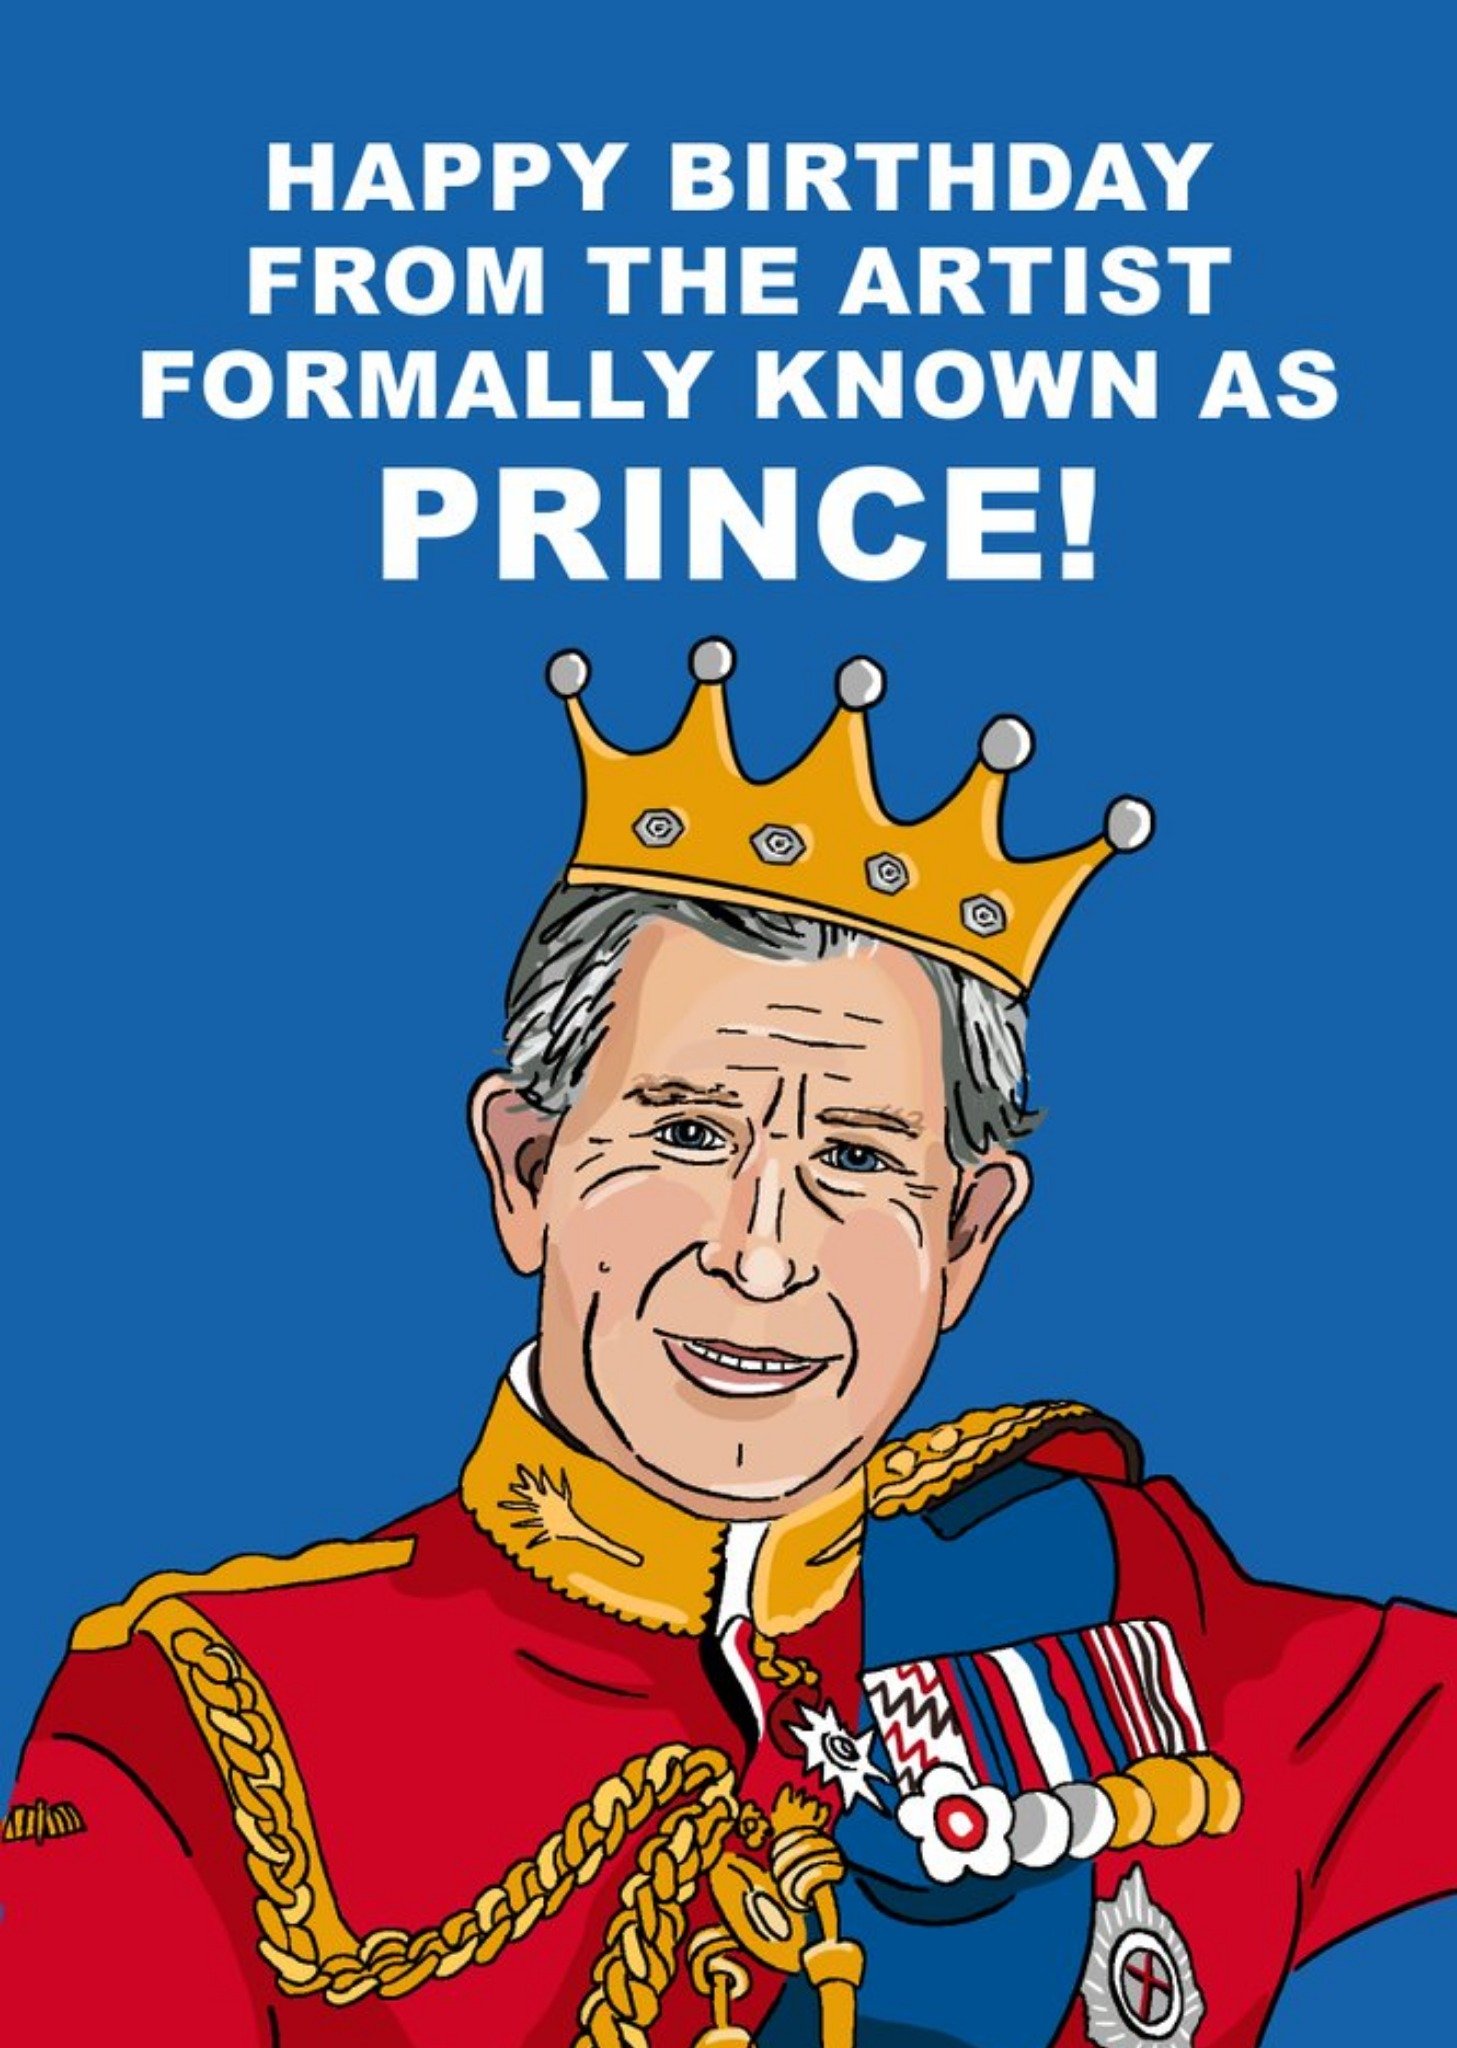 Moonpig Artist Formally Known As Prince Funny King Birthday Card Ecard